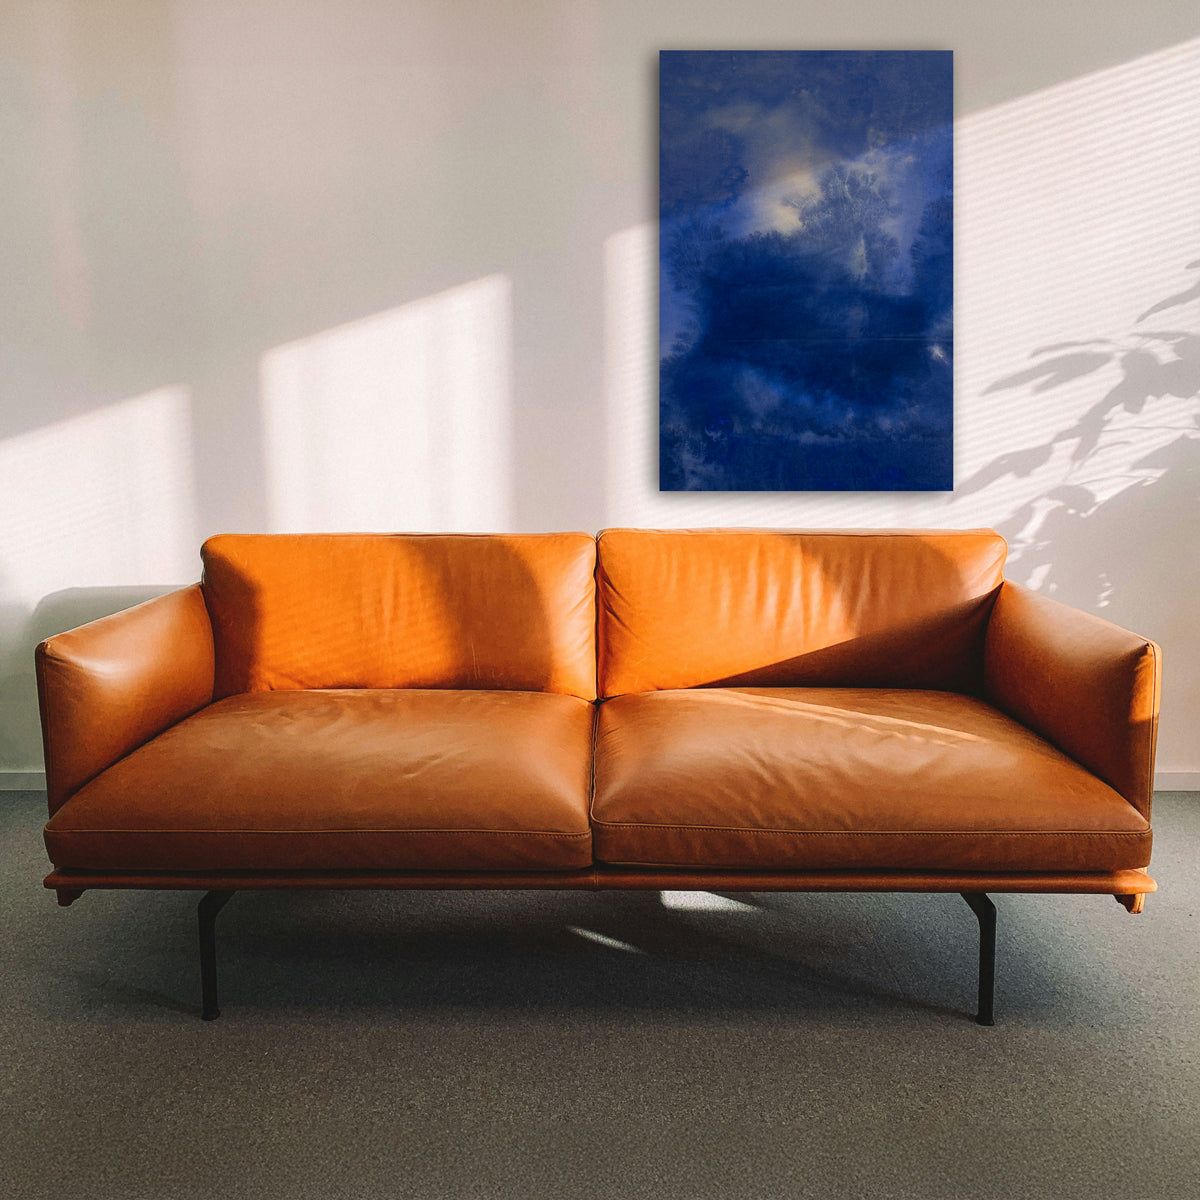 A blue abstract painting hangs above a brown leather coach in a sunny room